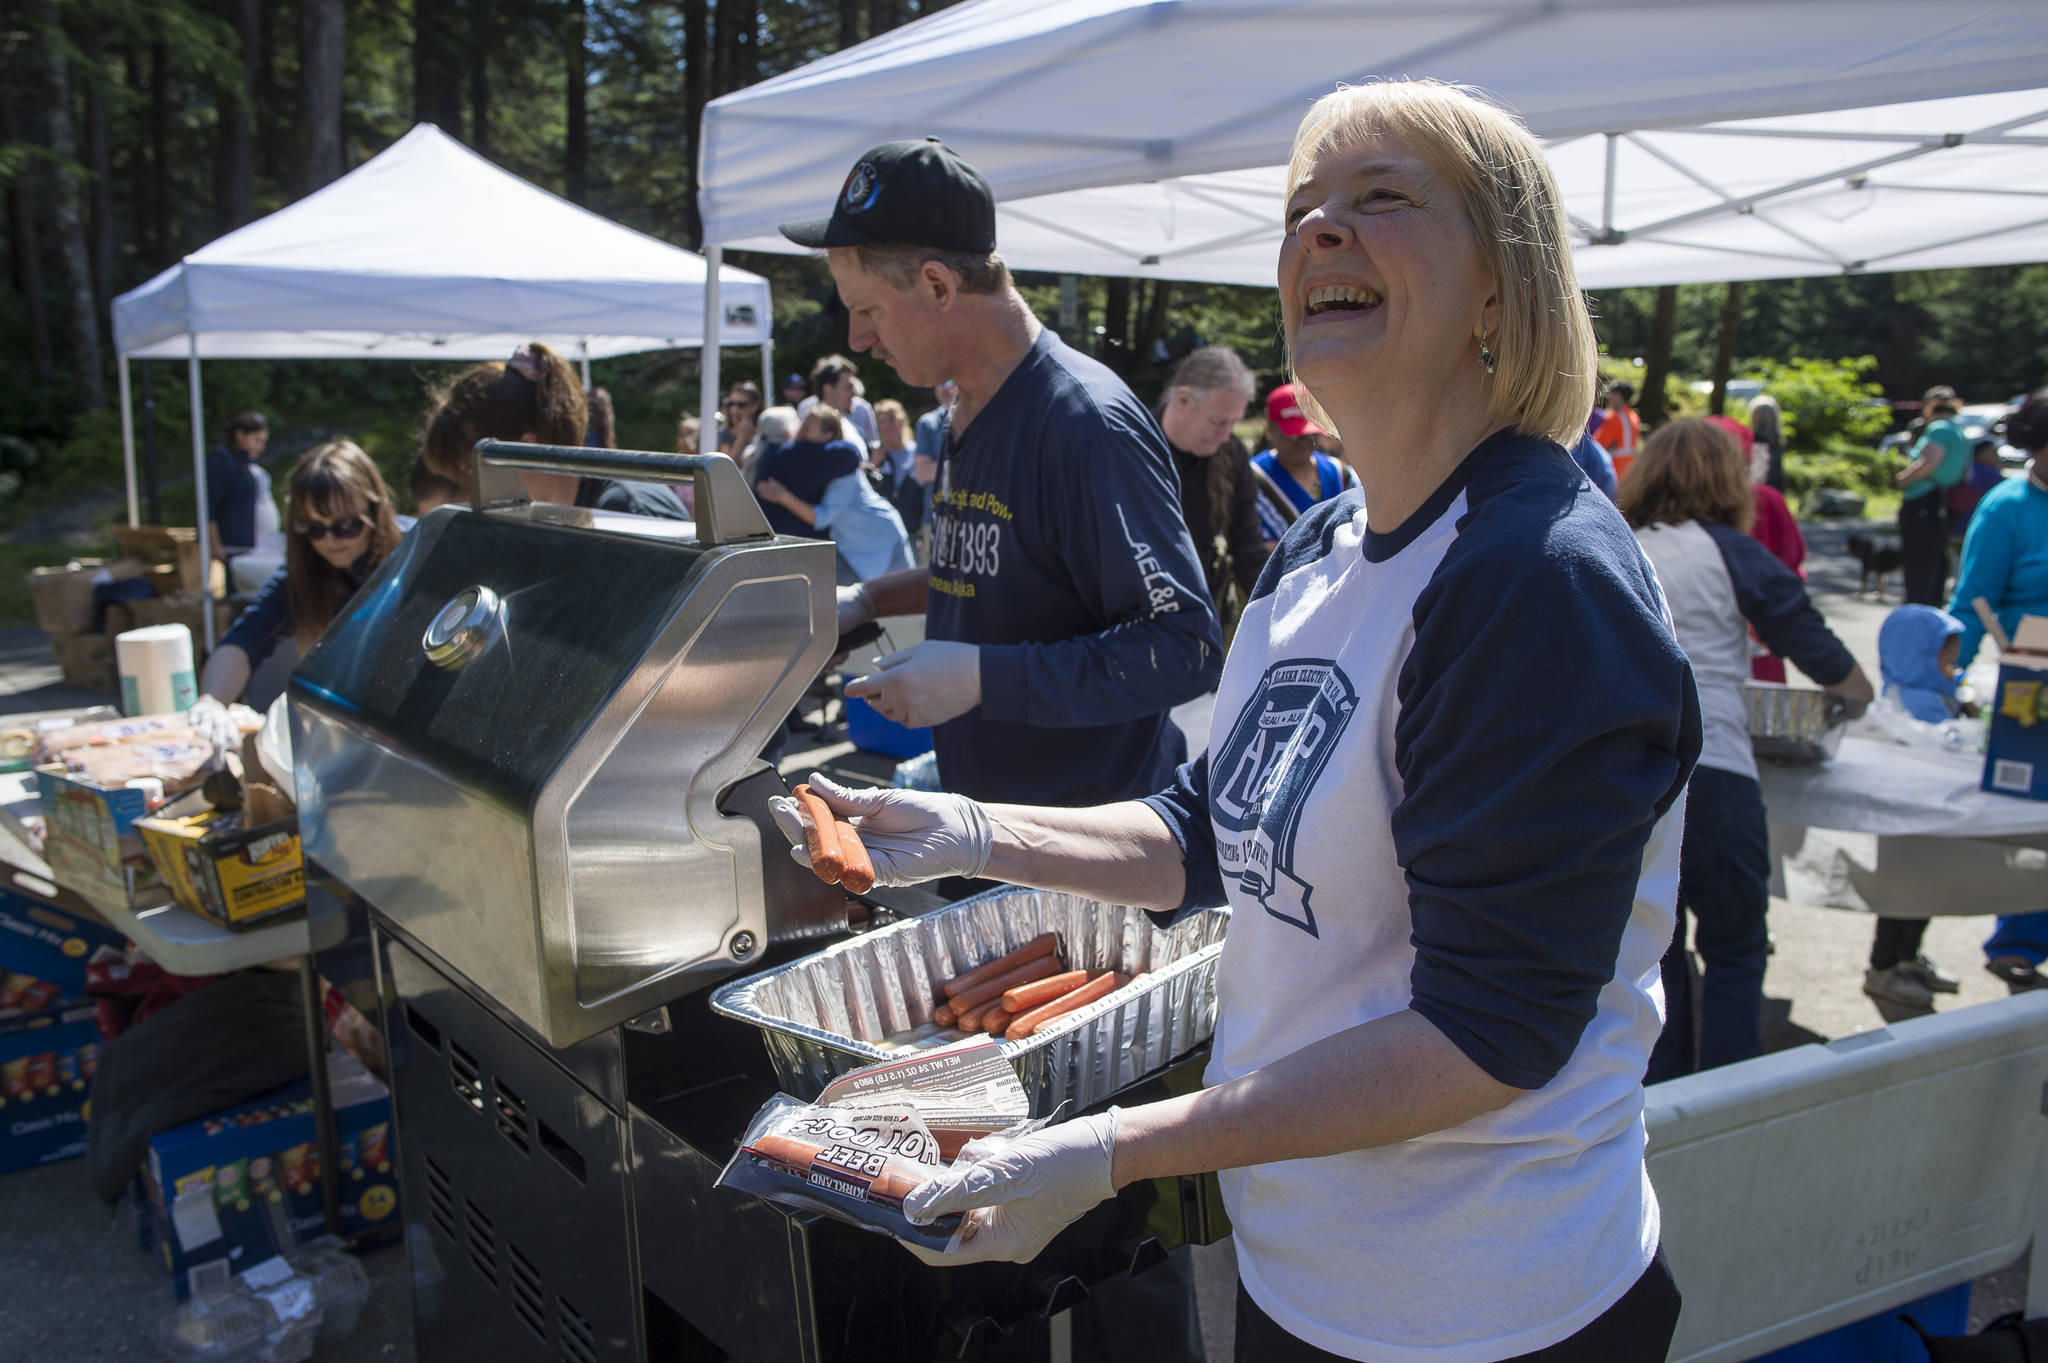 Connie Hulbert, President and General Manager of AEL&P, helps prepare food as the company celebrate its 125th year in business with a public picnic at Cope Park on Friday, July 20, 2018. The public was also invited to tour the Gold Creek Power Plant. (Michael Penn | Juneau Empire)